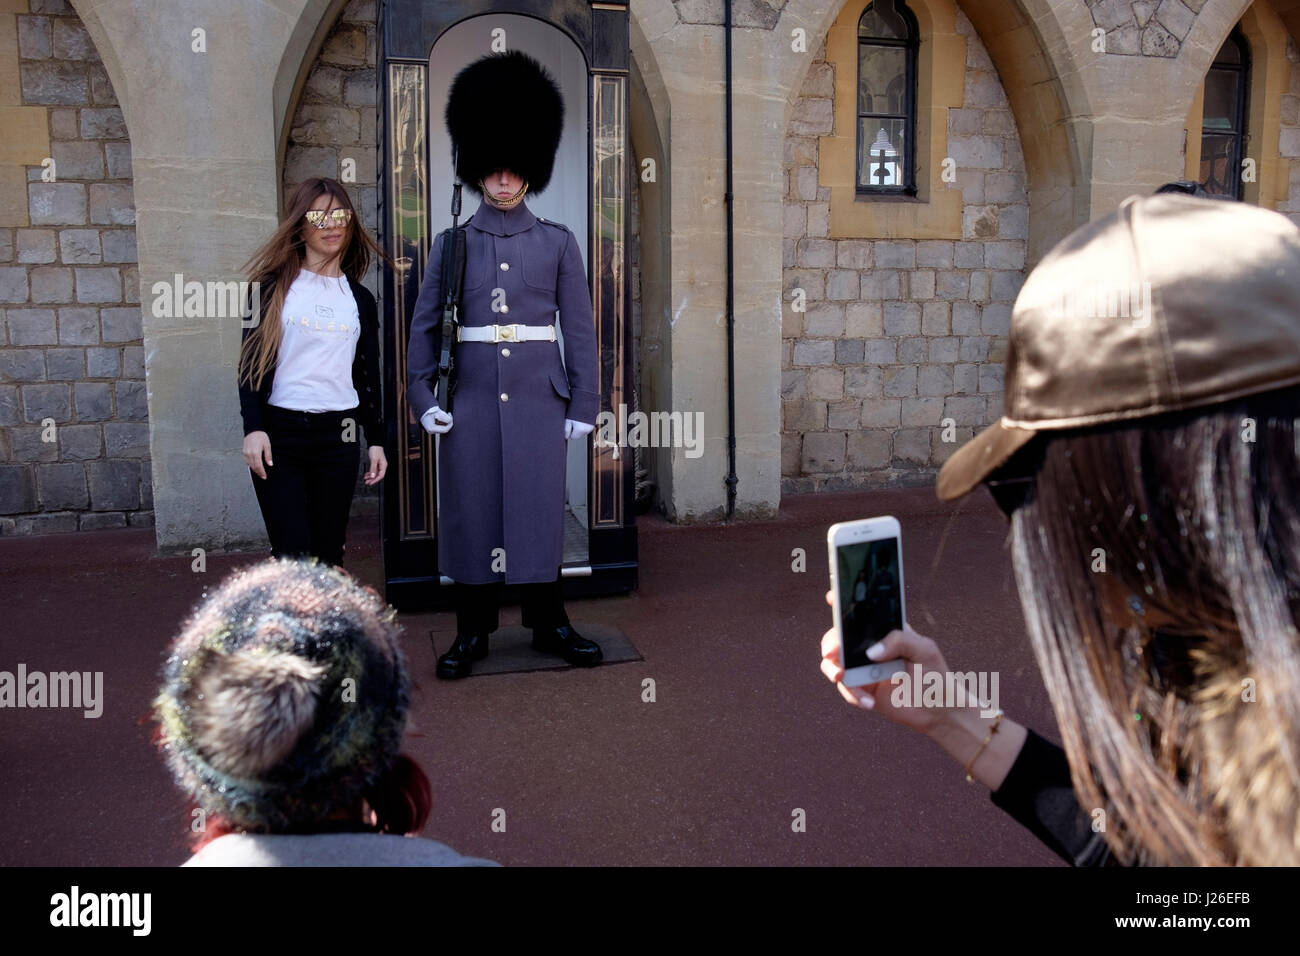 Tourist taking a photo with a Queen's guard in Winter uniform at Windsor Castle, England, UK, Europe Stock Photo